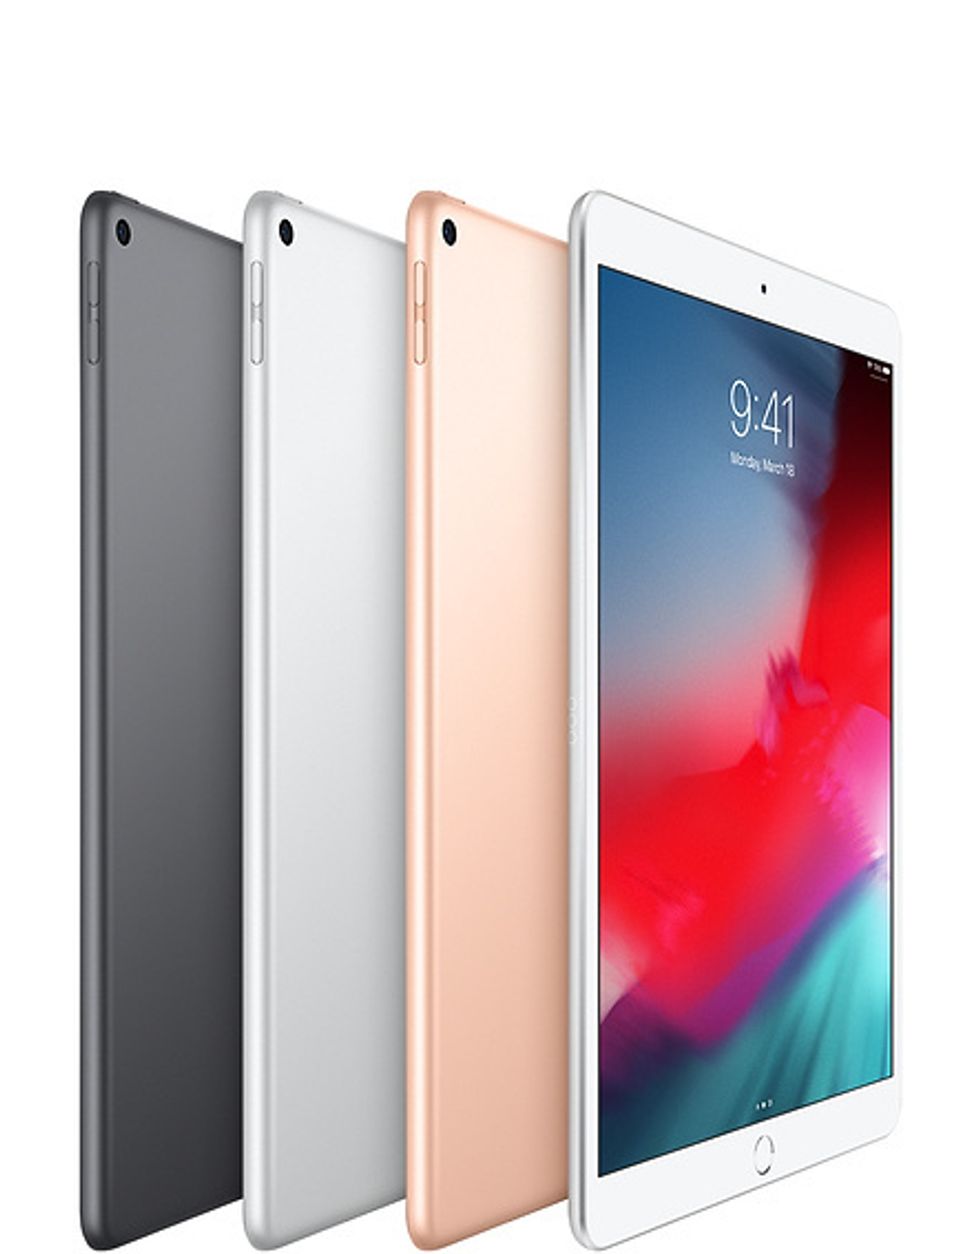 The iPad Air 3 tablet from Apple in dark gray, silver, rose gold and white